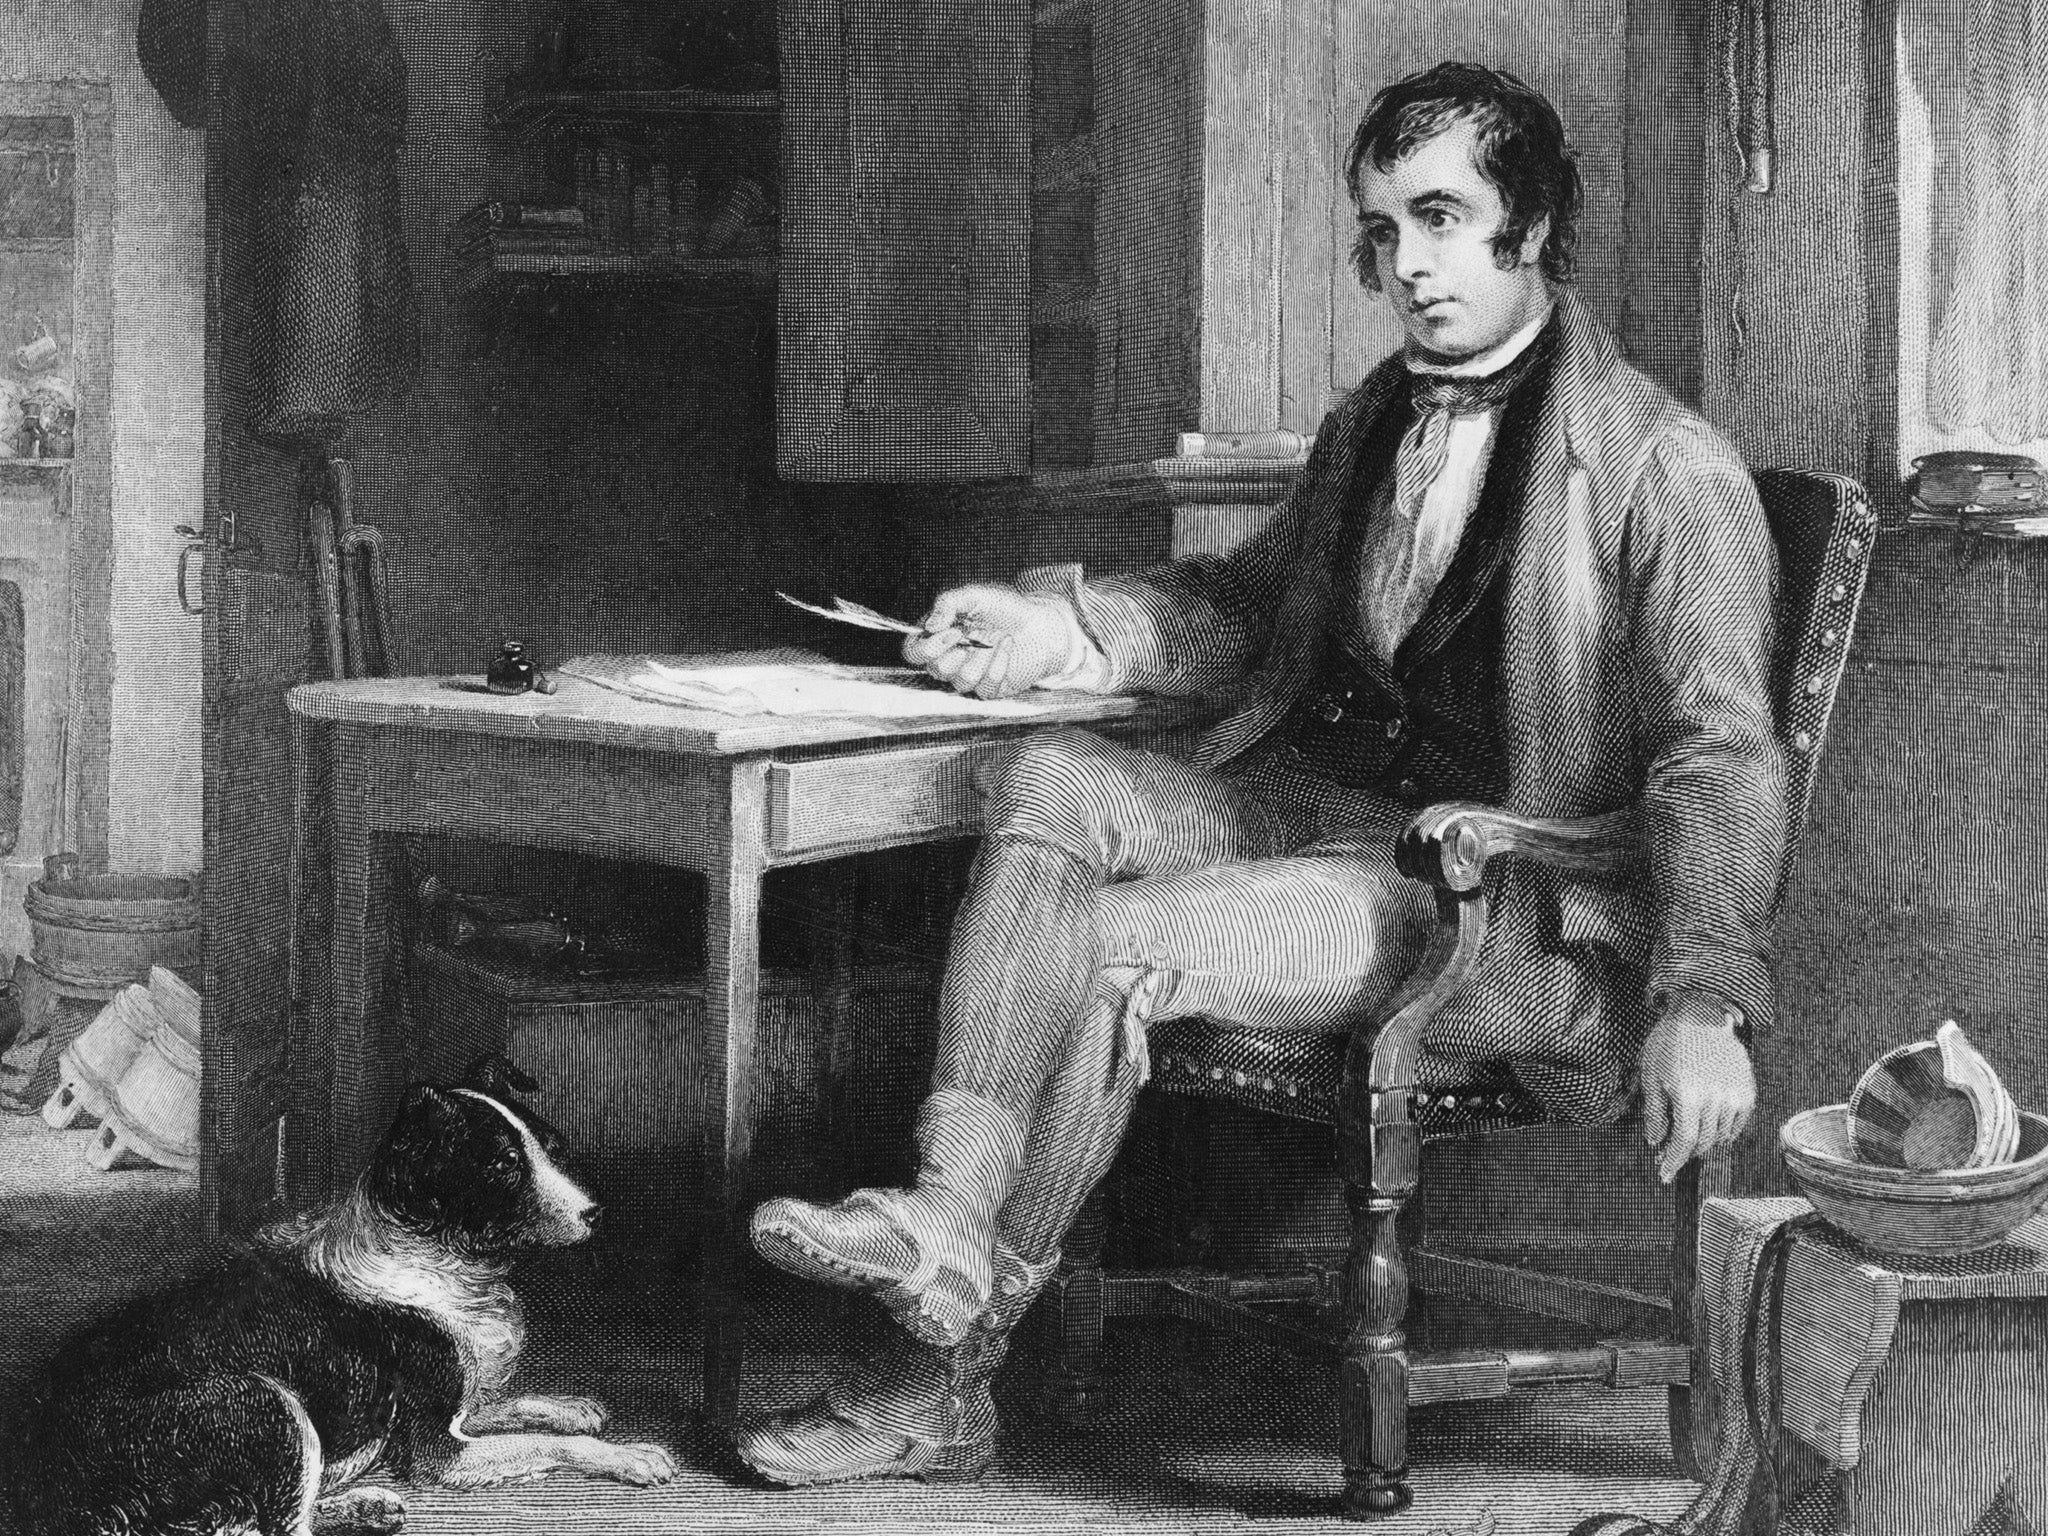 Burns night celebrations are expected to take place across Scotland tonight